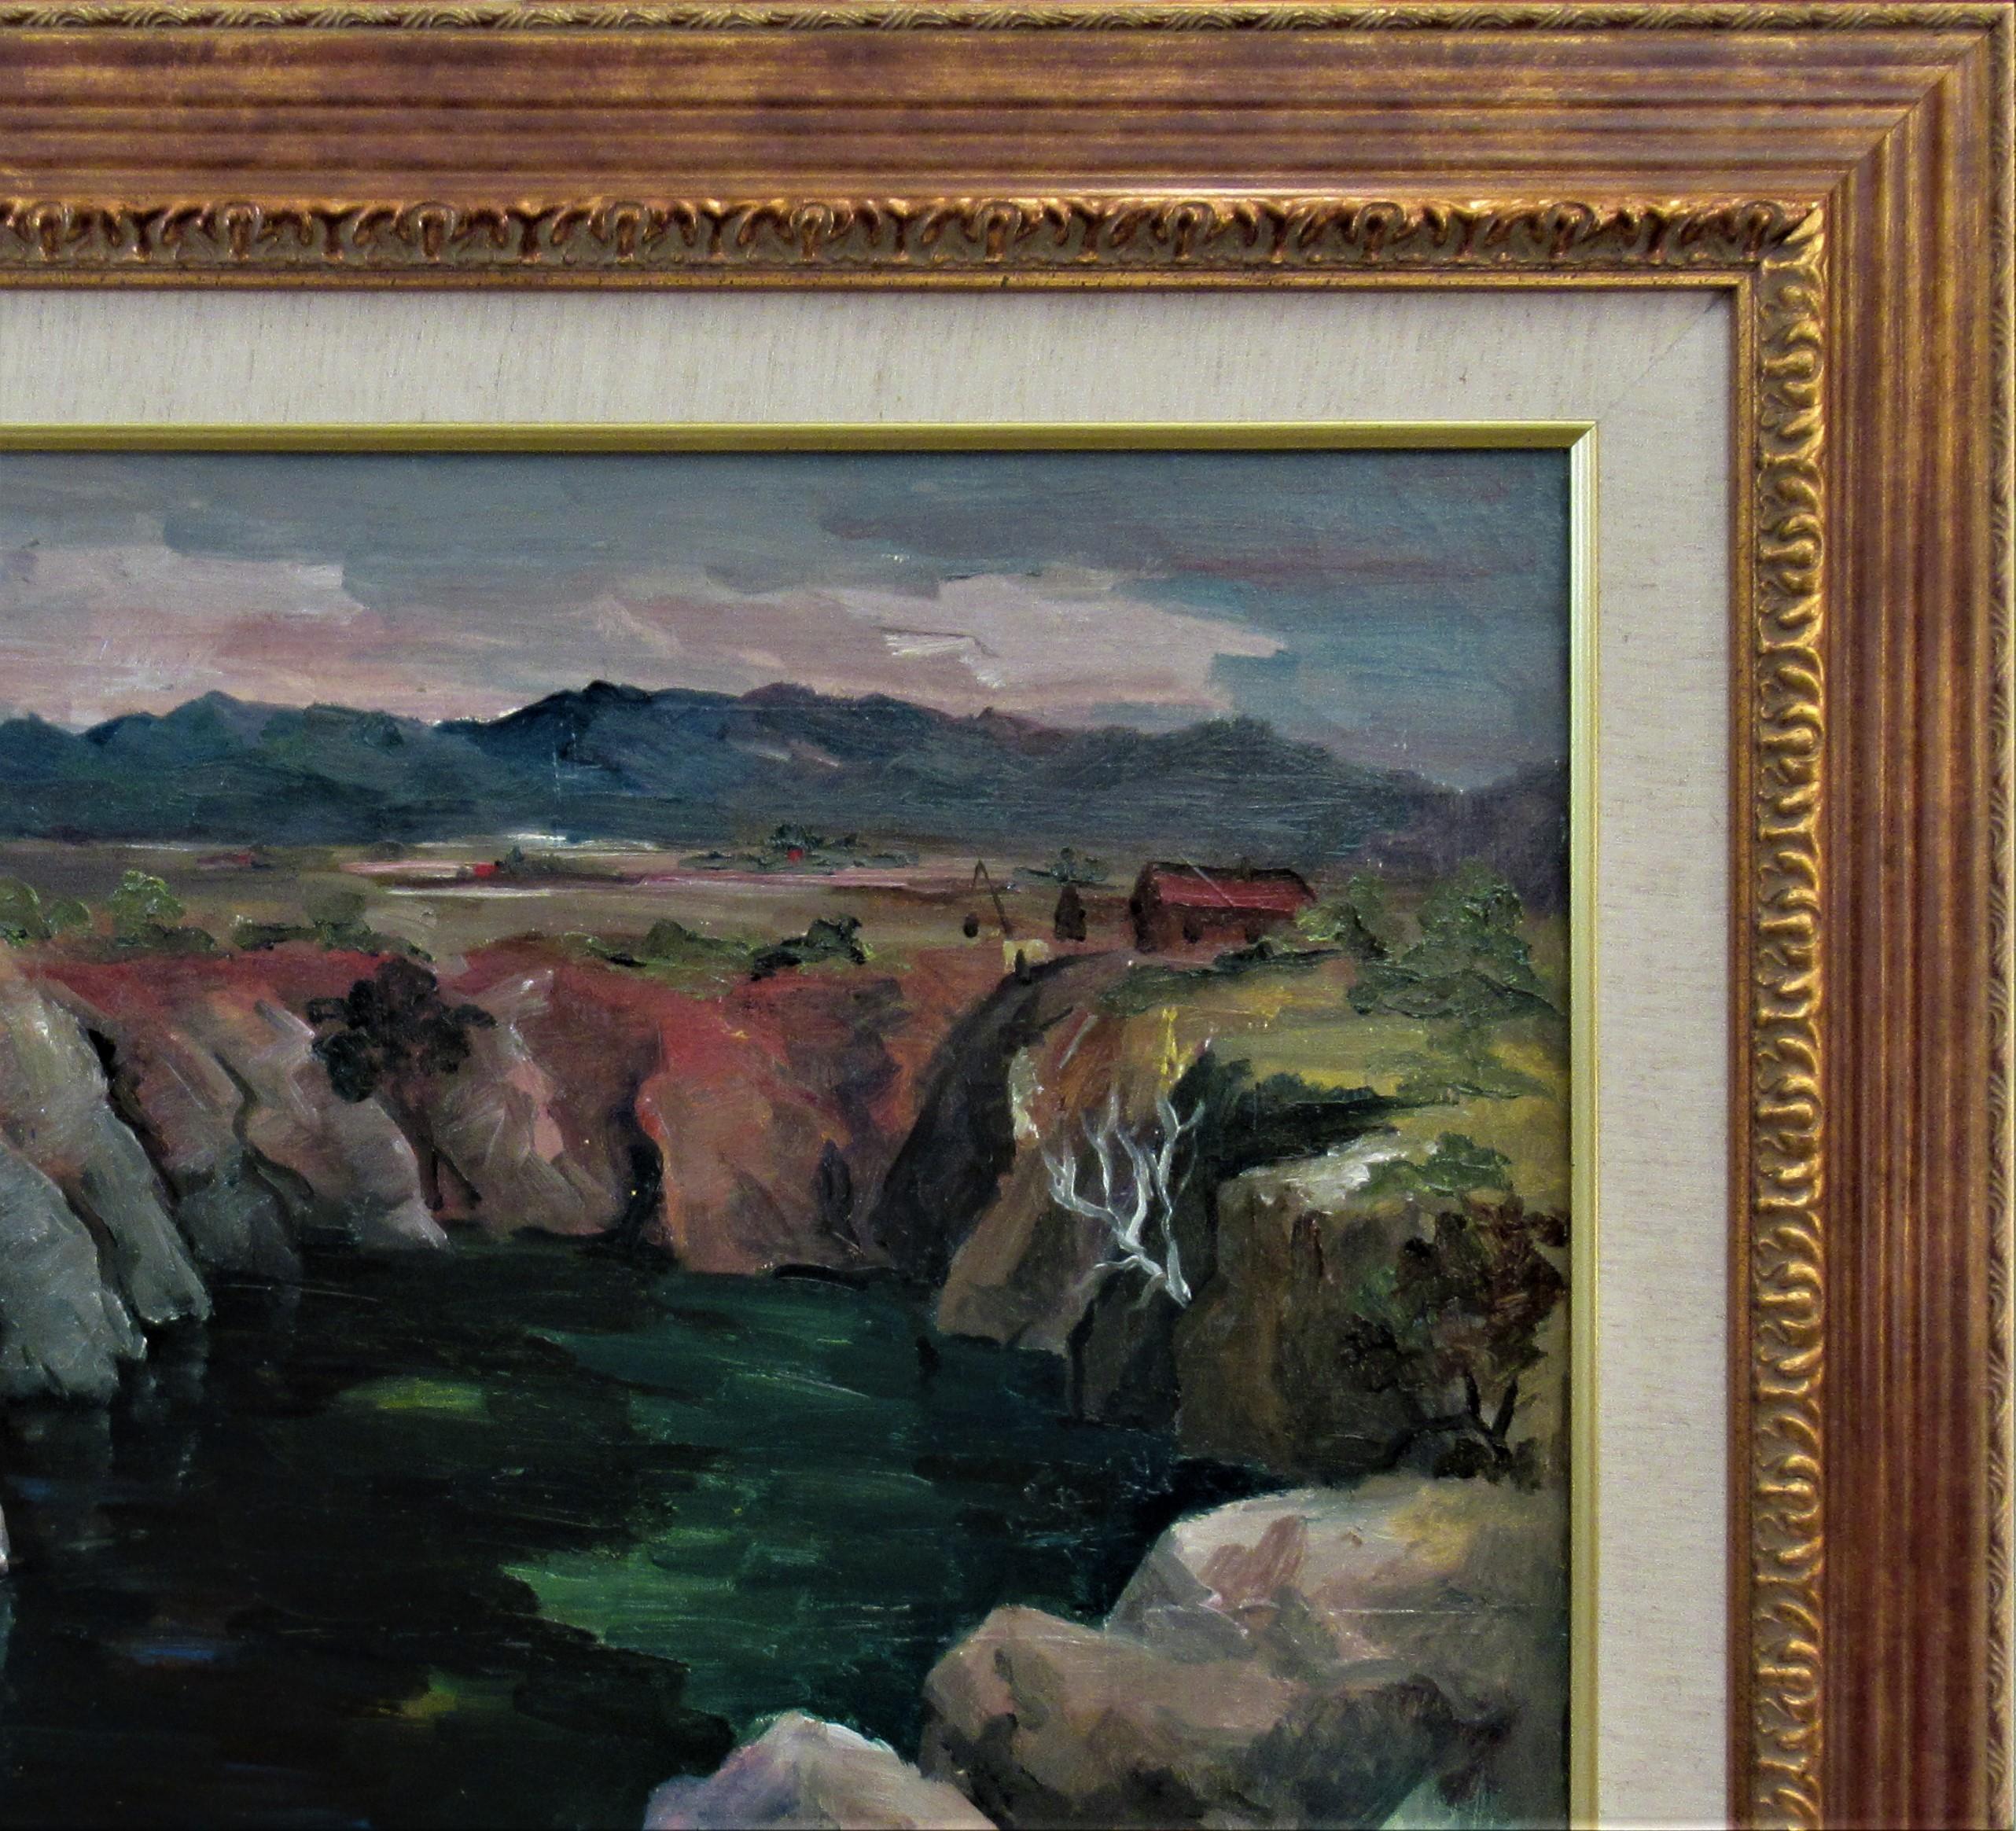 Landscape, California - American Impressionist Painting by Elmer Stanhope